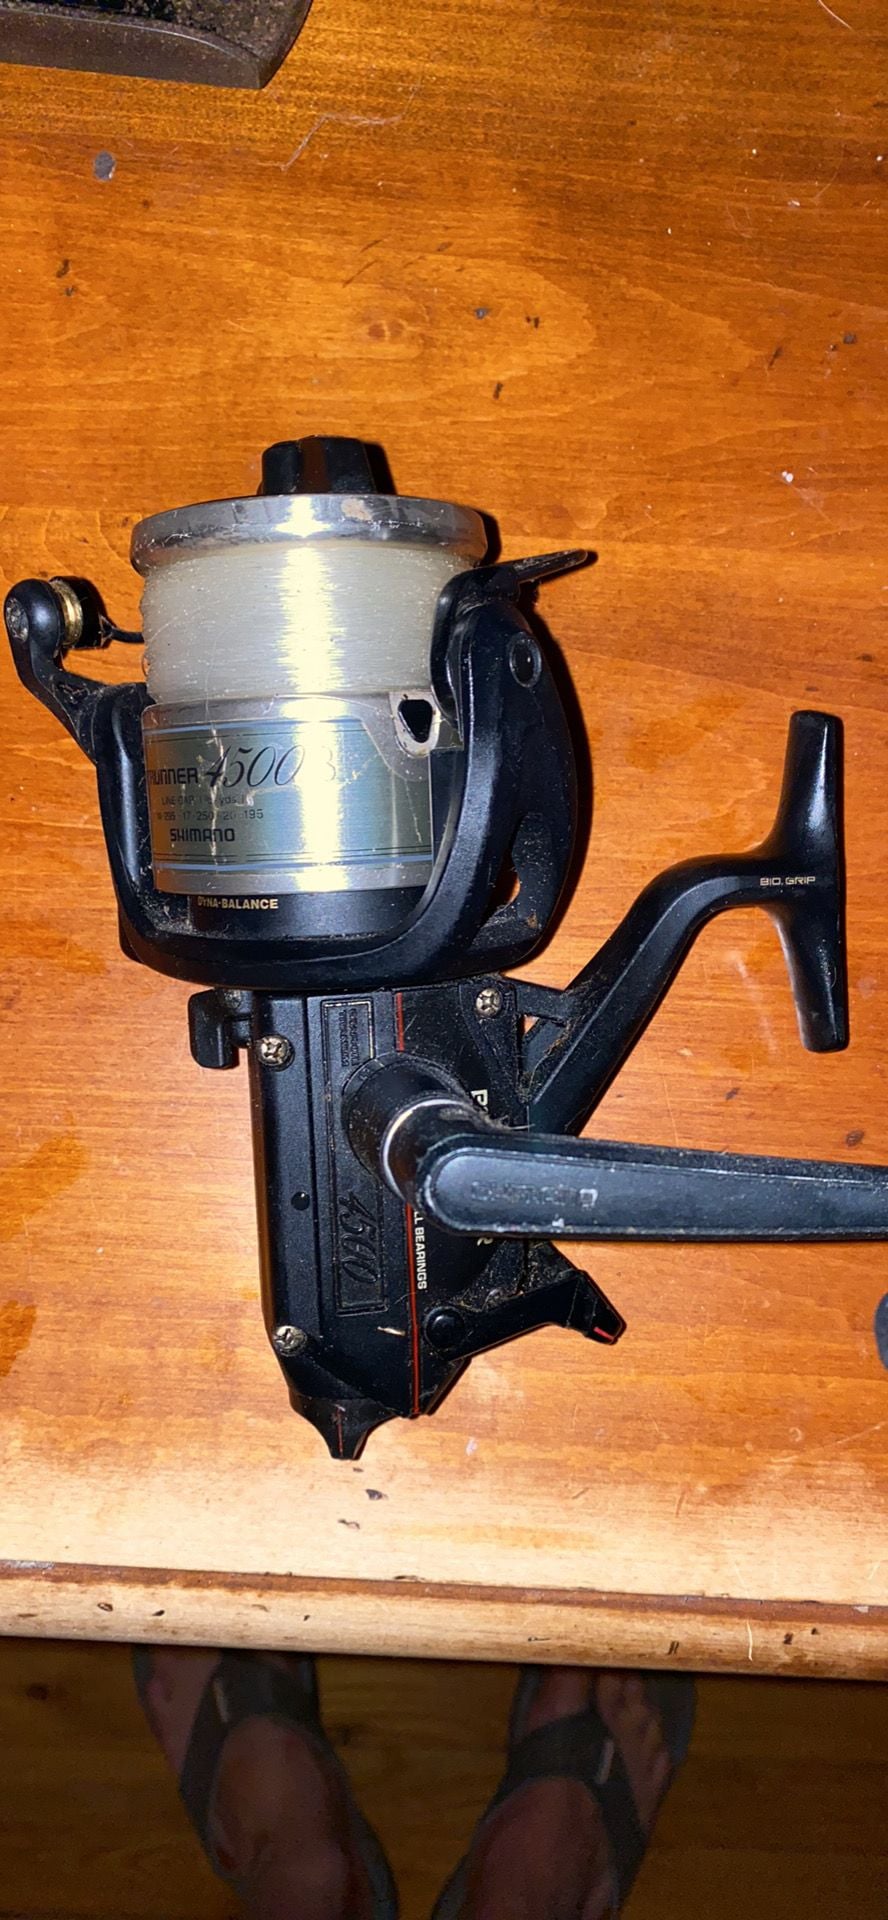 Shimano baitrunner 4500 b--Hacked account. Do not buy - The Hull Truth -  Boating and Fishing Forum